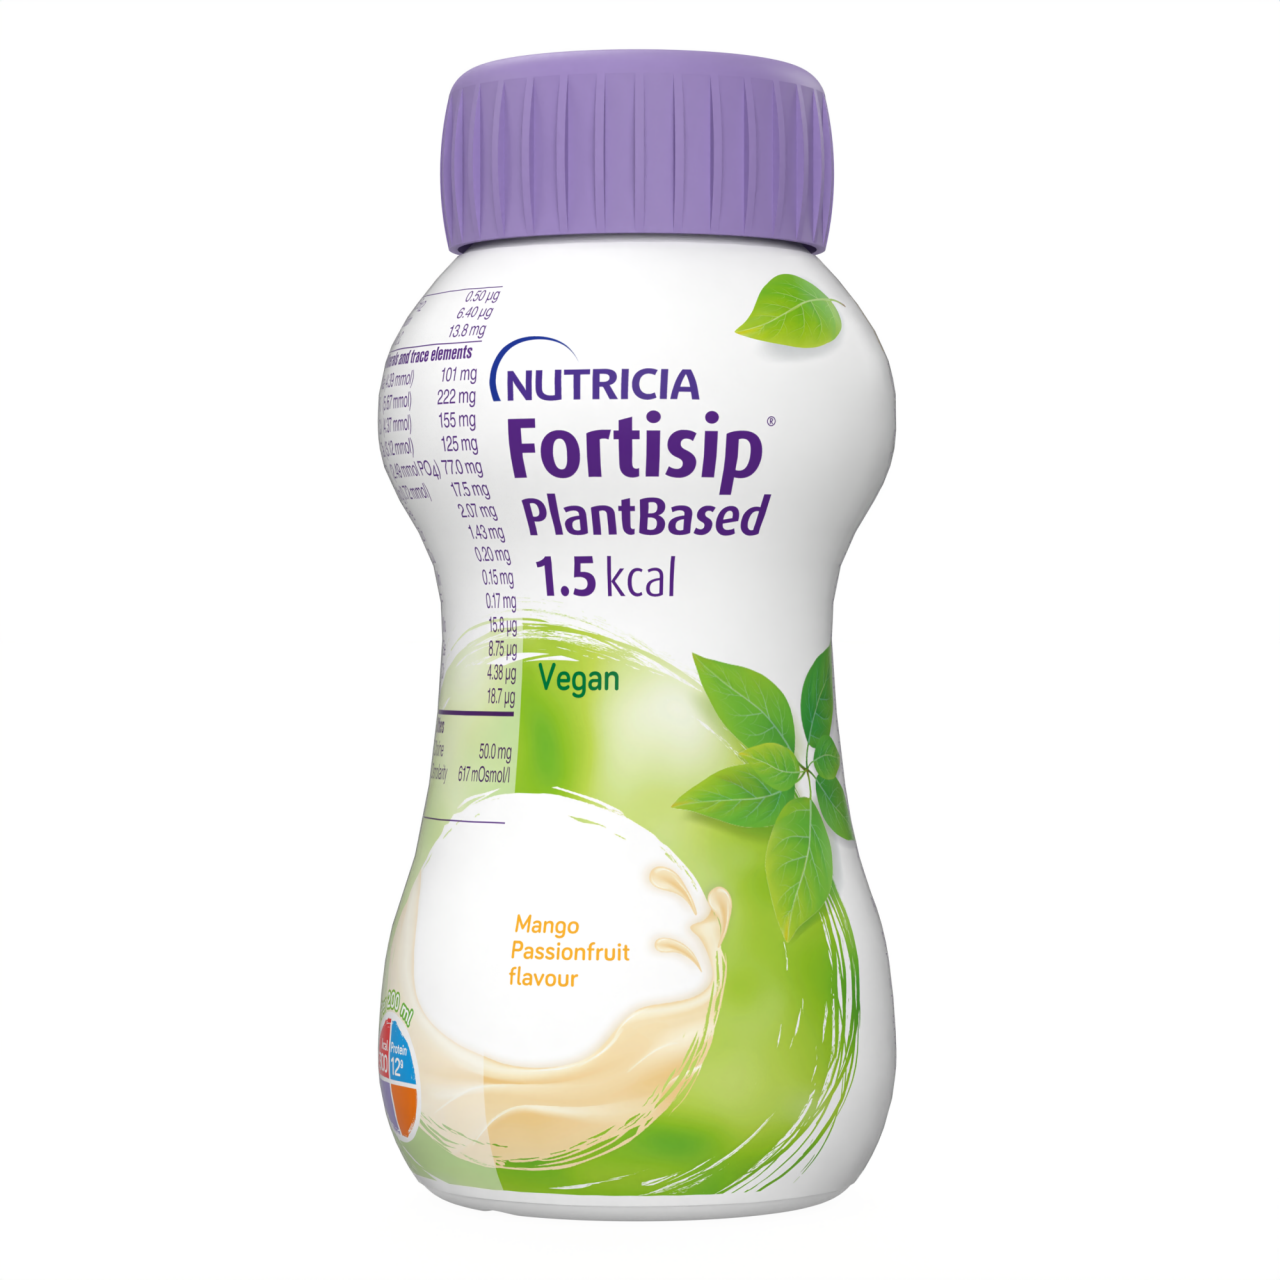 Fortisip PlantBased 1.5kcal